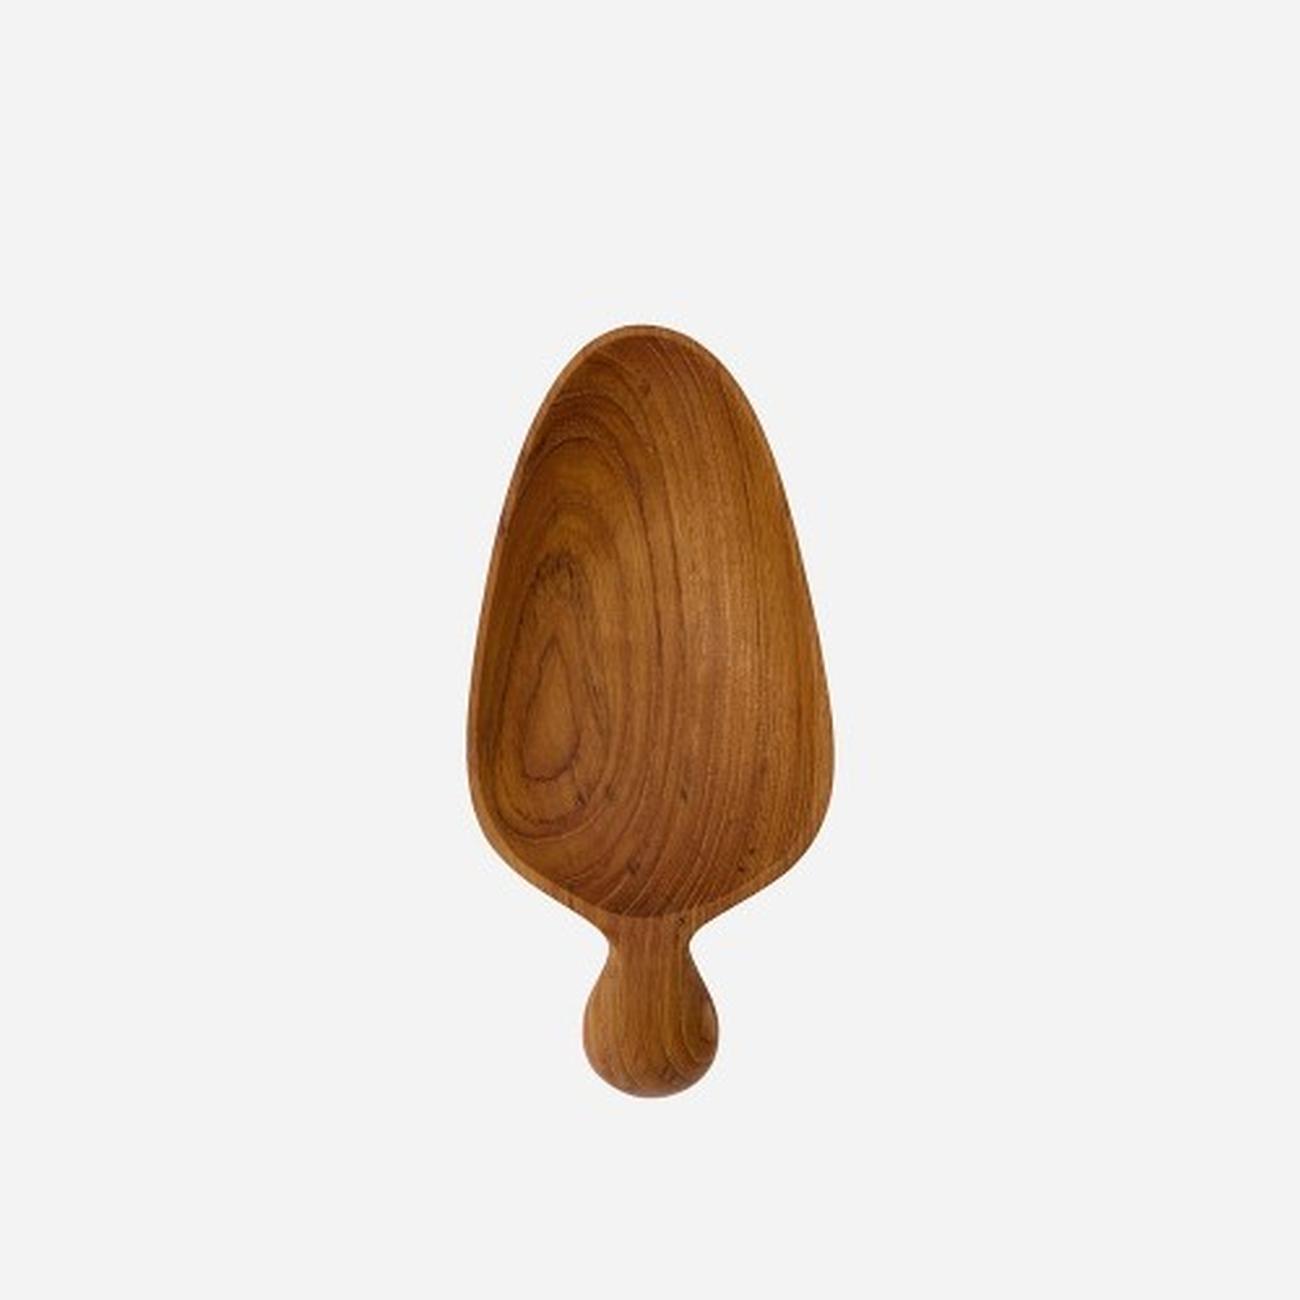 house-doctor-scoop-nature-large - House Doctor Teak Scoop Large